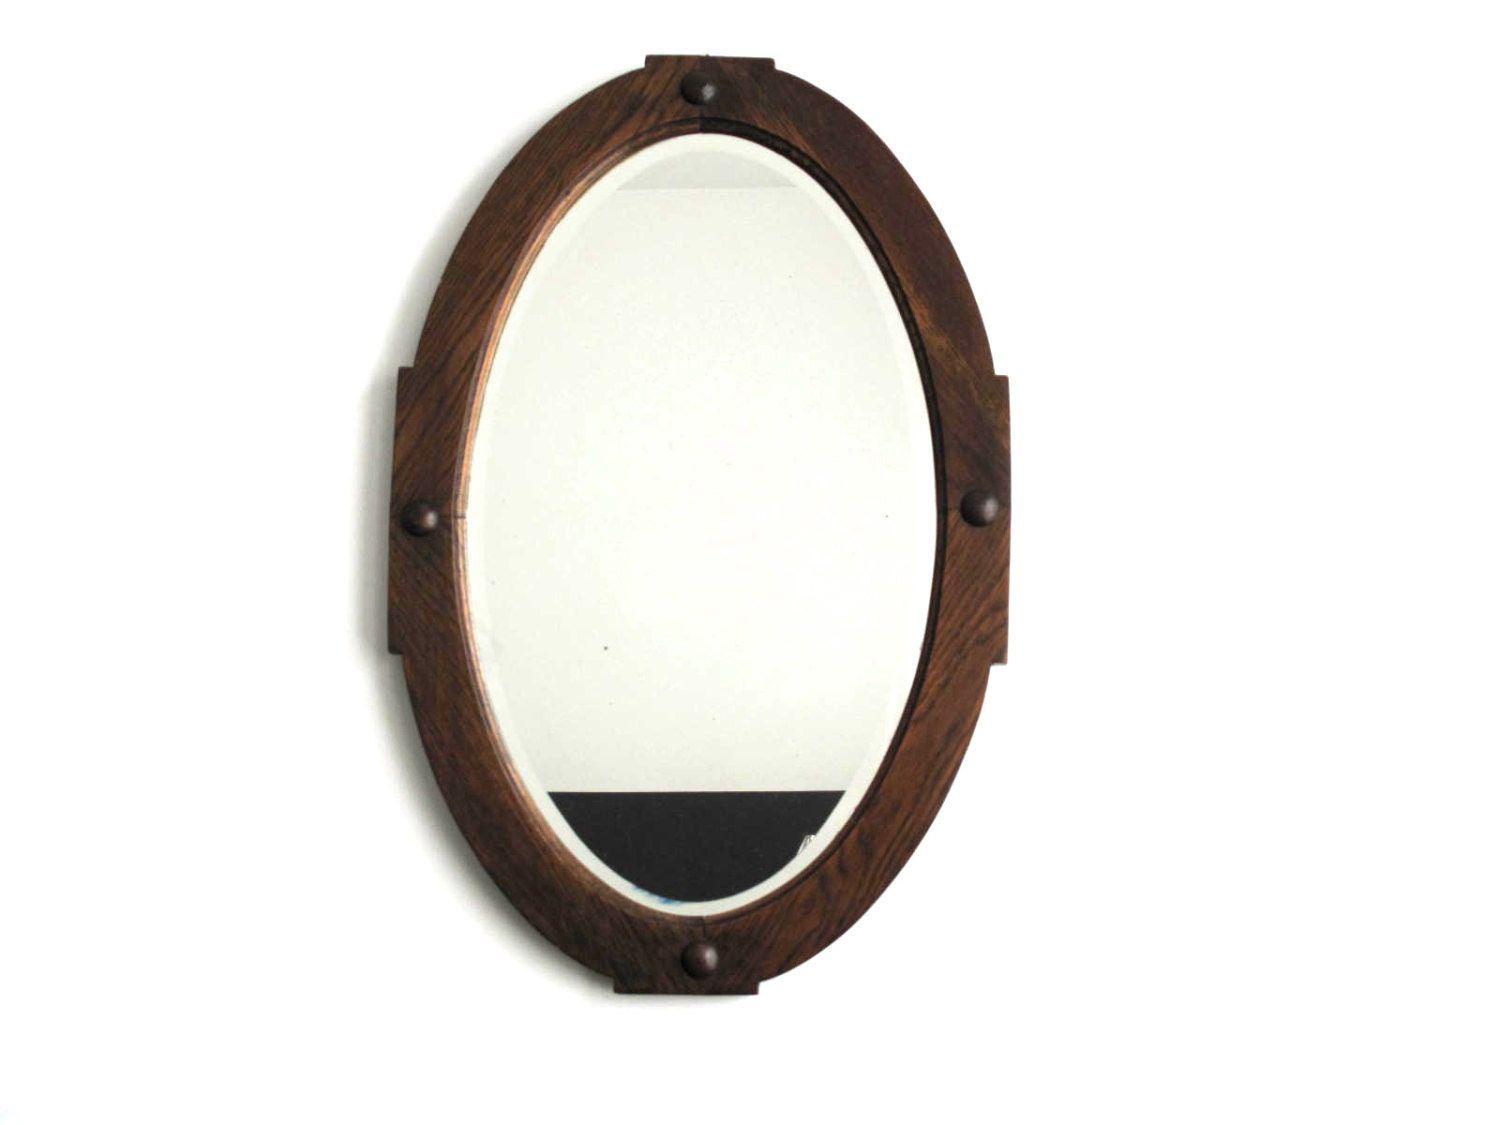 Antique Wood Framed Oval Wall Mirror Vintagesnapshotvintage With Wooden Oval Wall Mirrors (View 3 of 15)